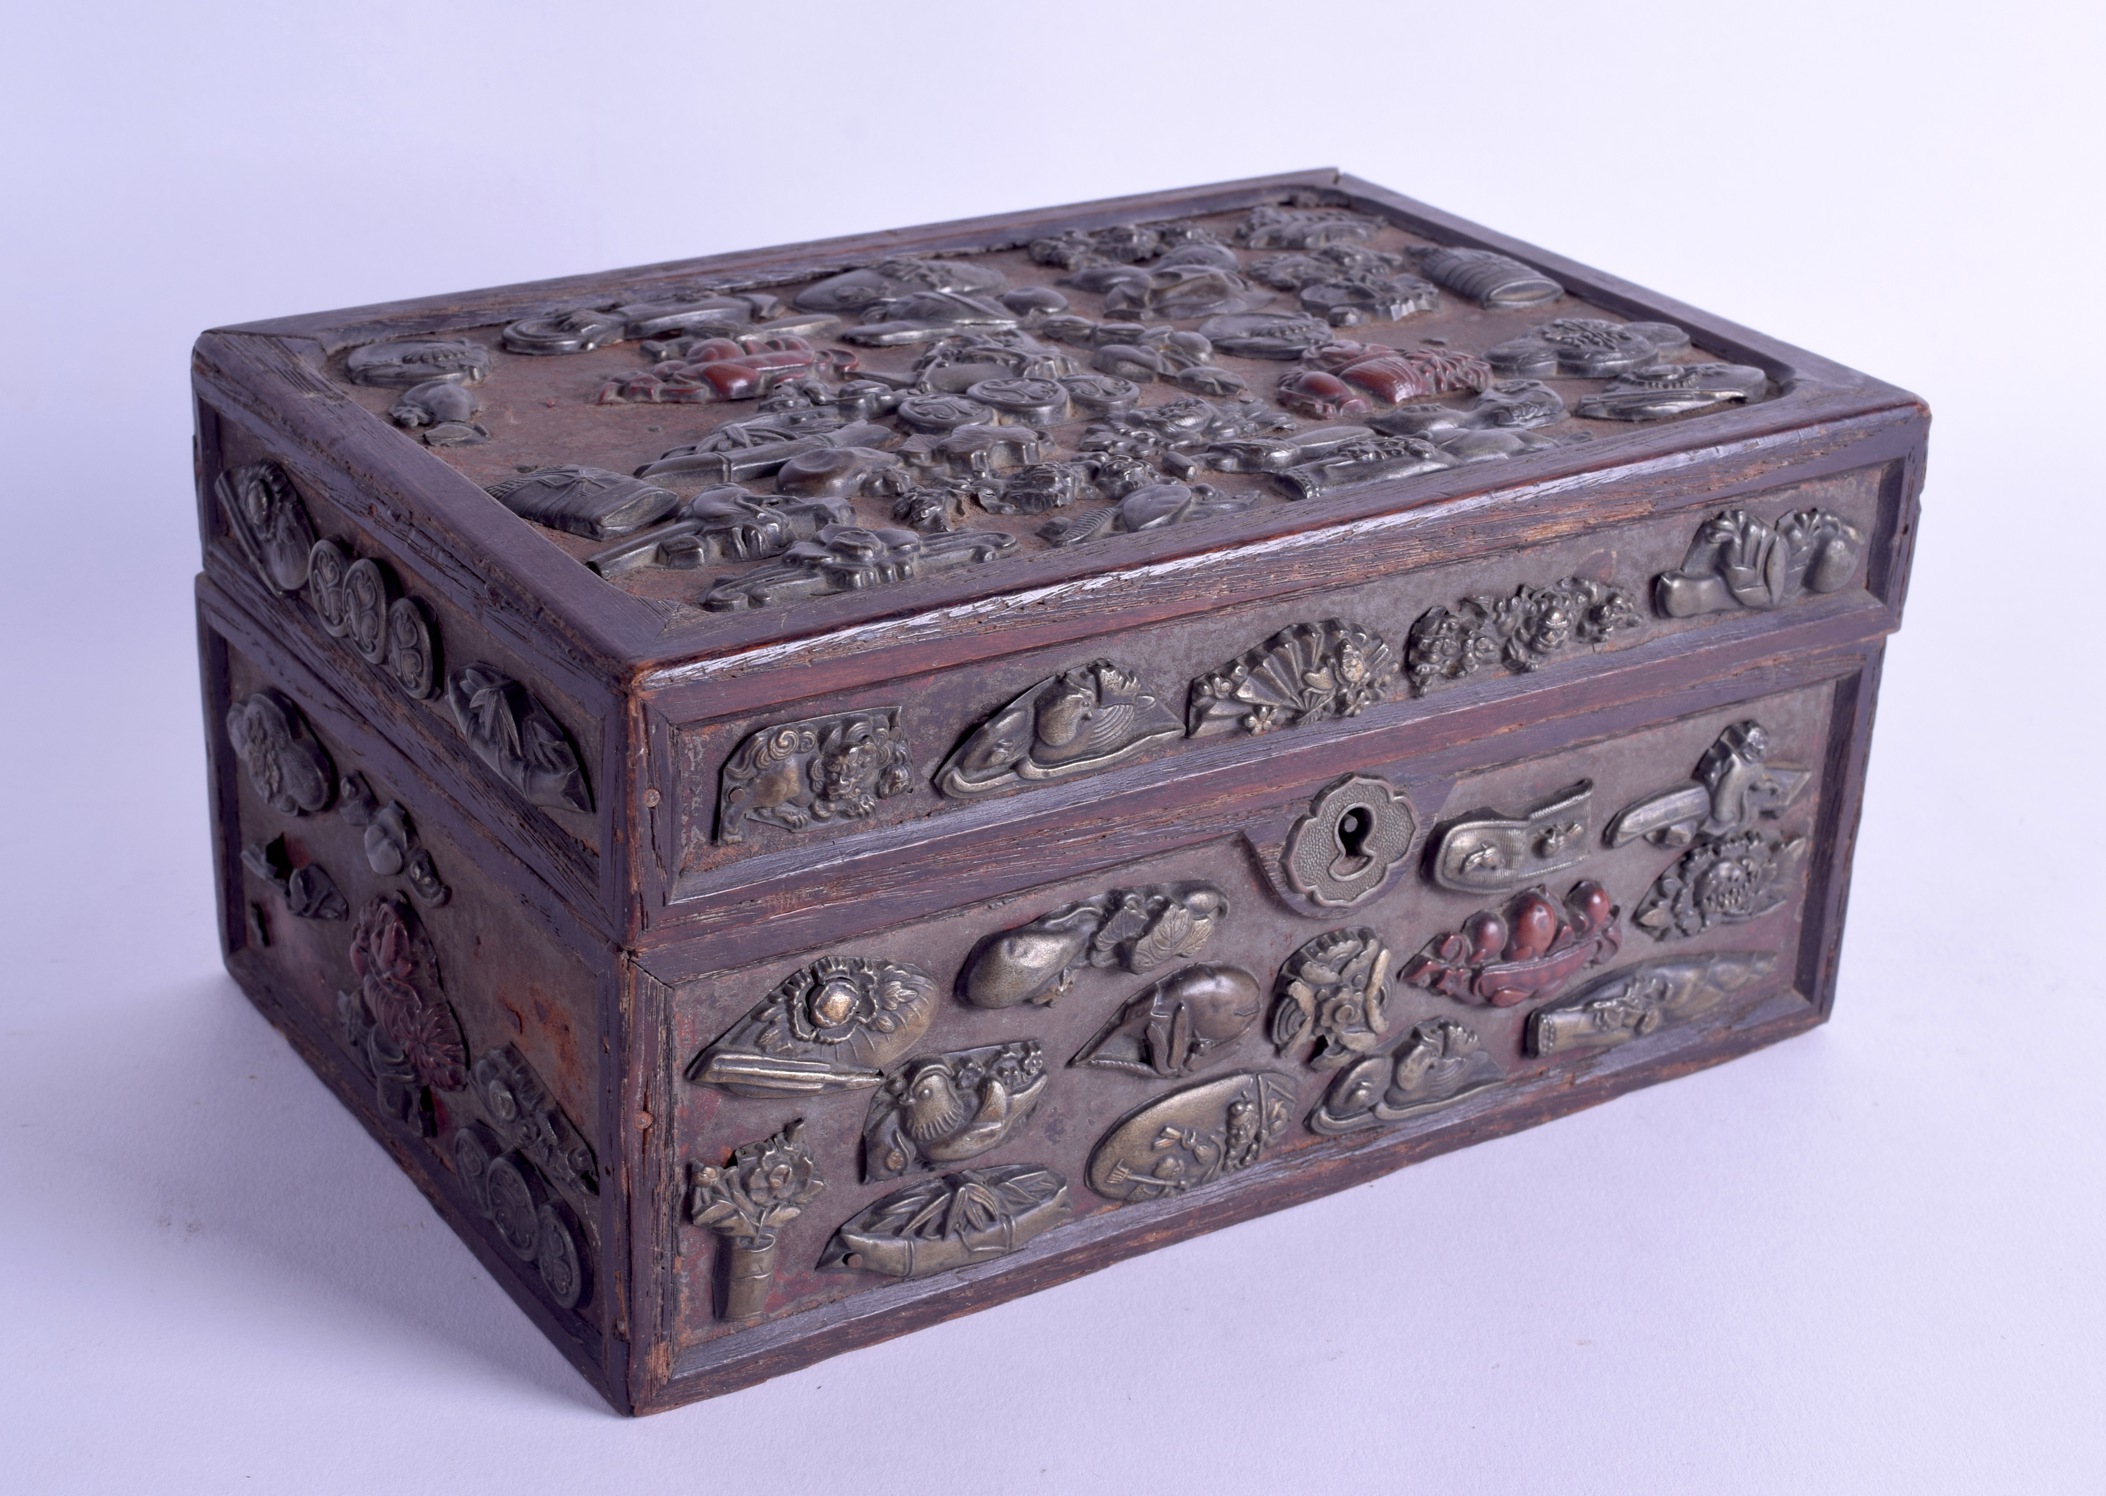 A RARE LATE 19TH CENTURY JAPANESE MEIJI PERIOD CARVED WOOD CASKET unusually overlaid in mixed